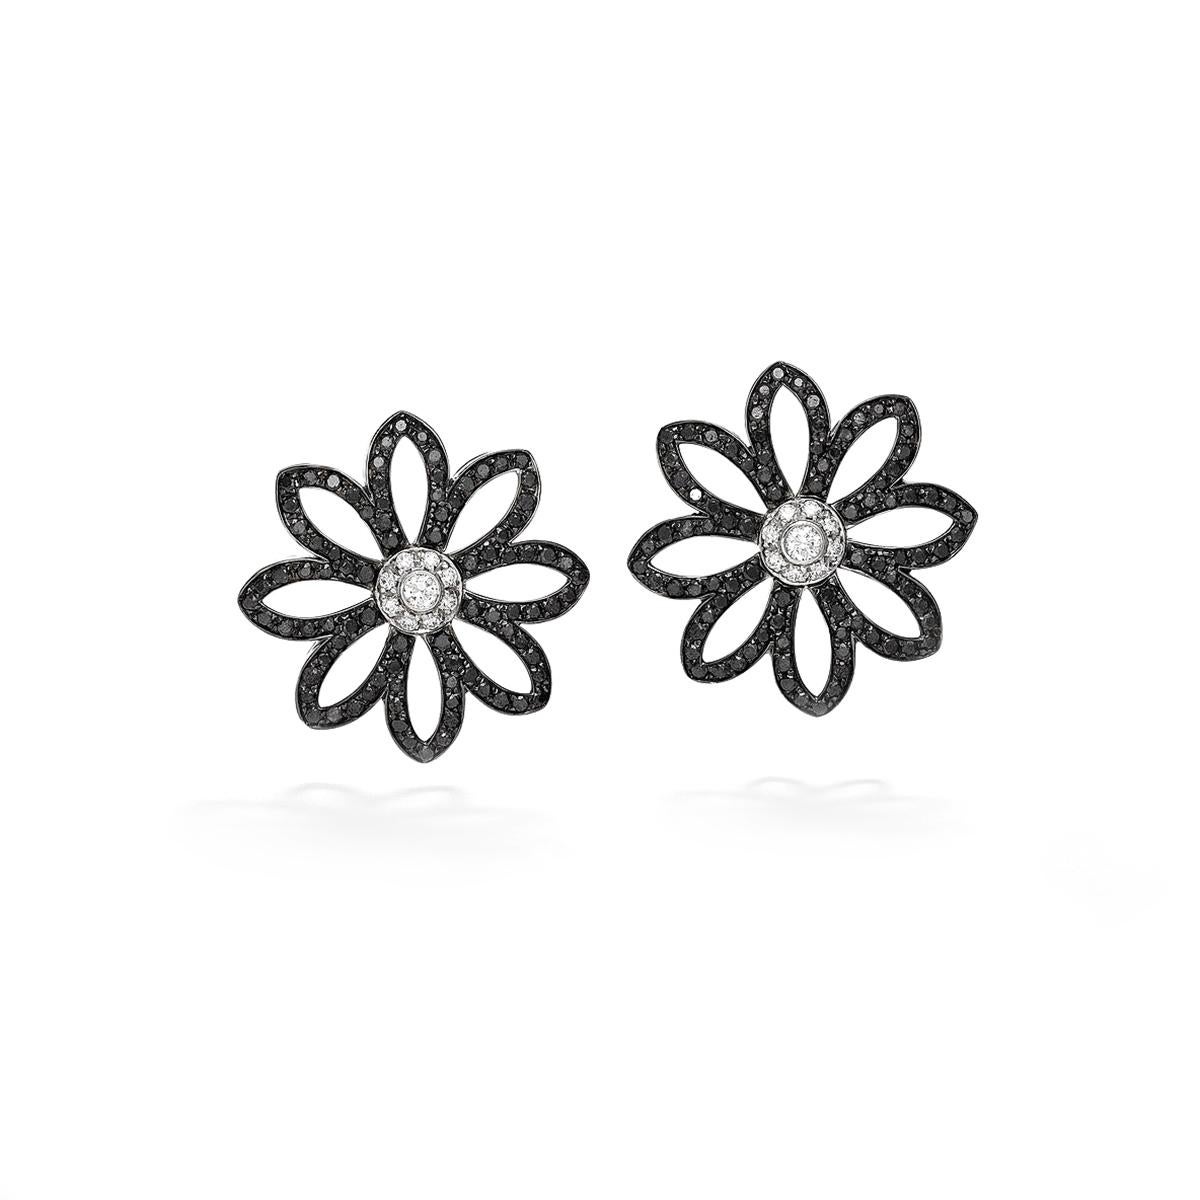 Flower earrings in 18kt white gold set with 176 black diamonds 5.60 cts and 18 diamonds 0.73 cts